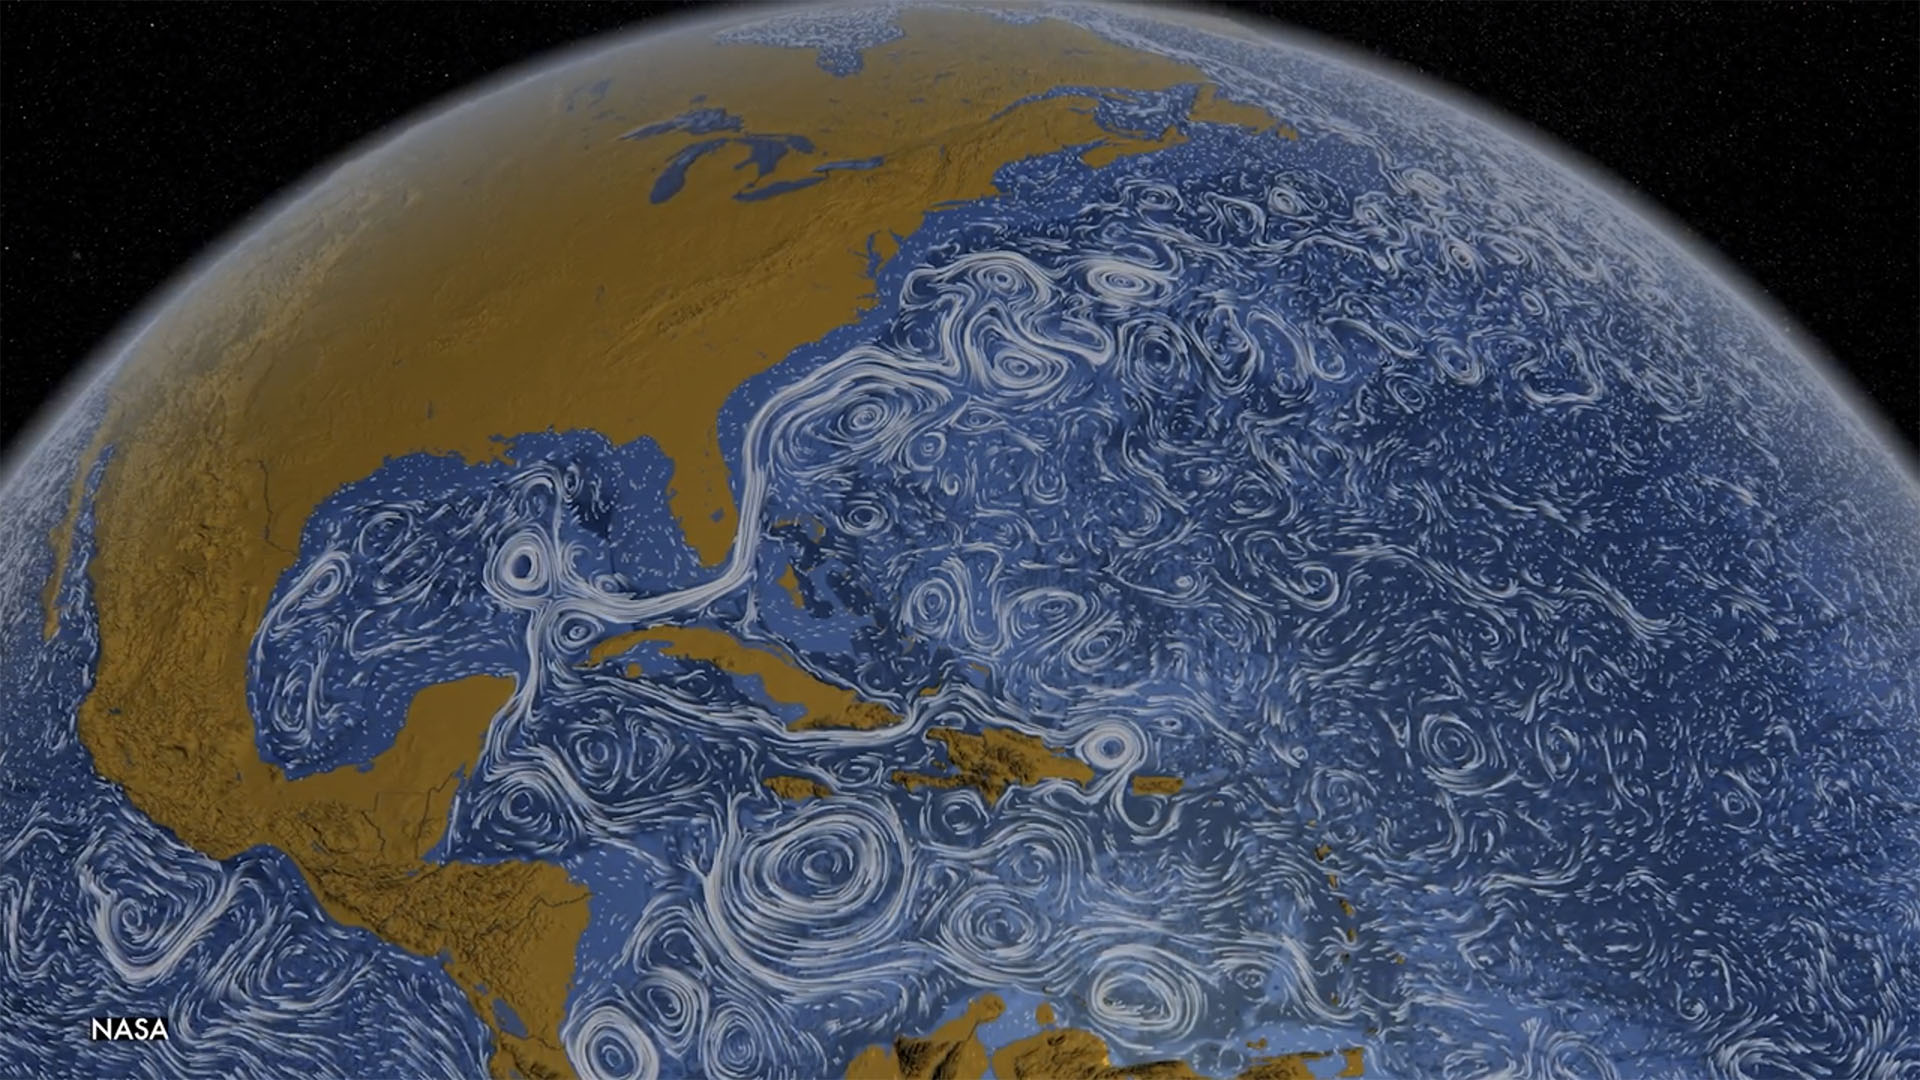 A image of the earth an ocean showing the study of Eddies in the ocean from NASA.